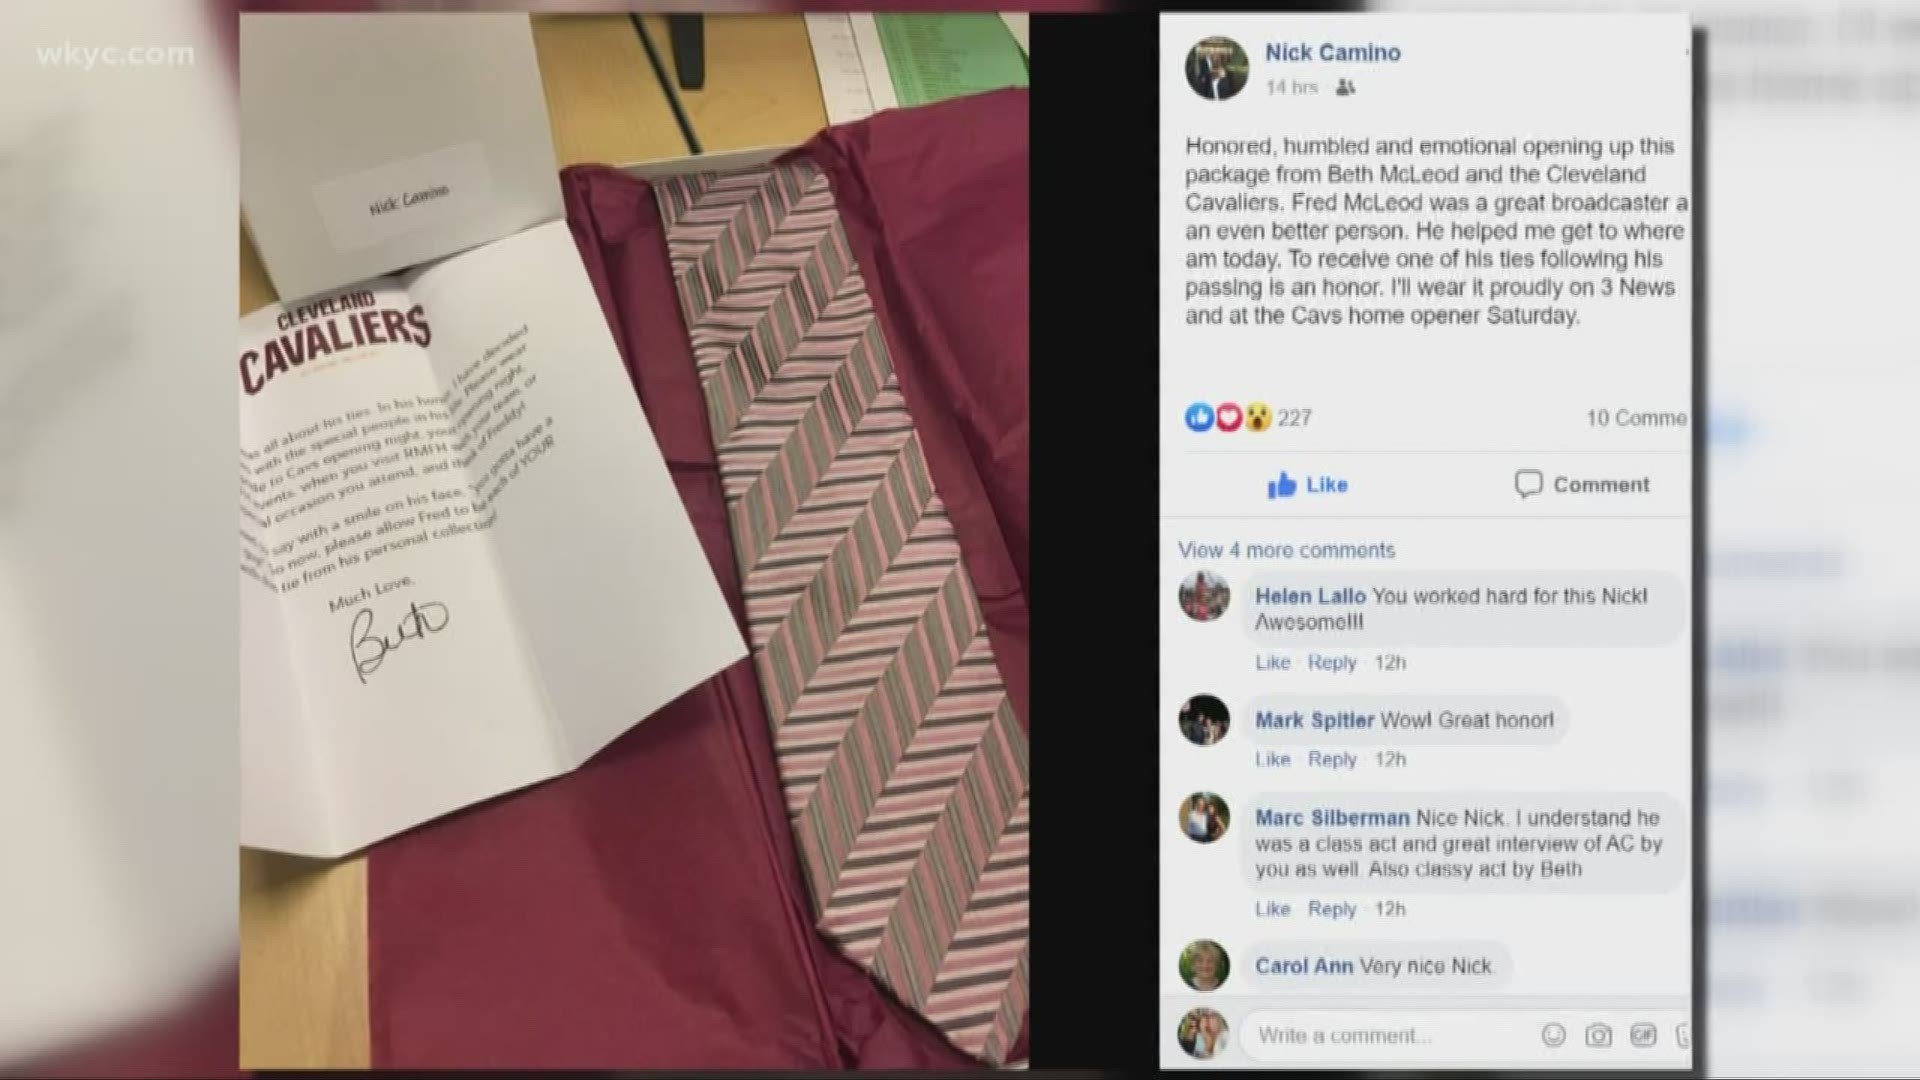 Each tie, sent wrapped in a special box, includes a message asking those receiving one to wear it to the Cavs' home opener on Oct. 26 against the Indiana Pacers.